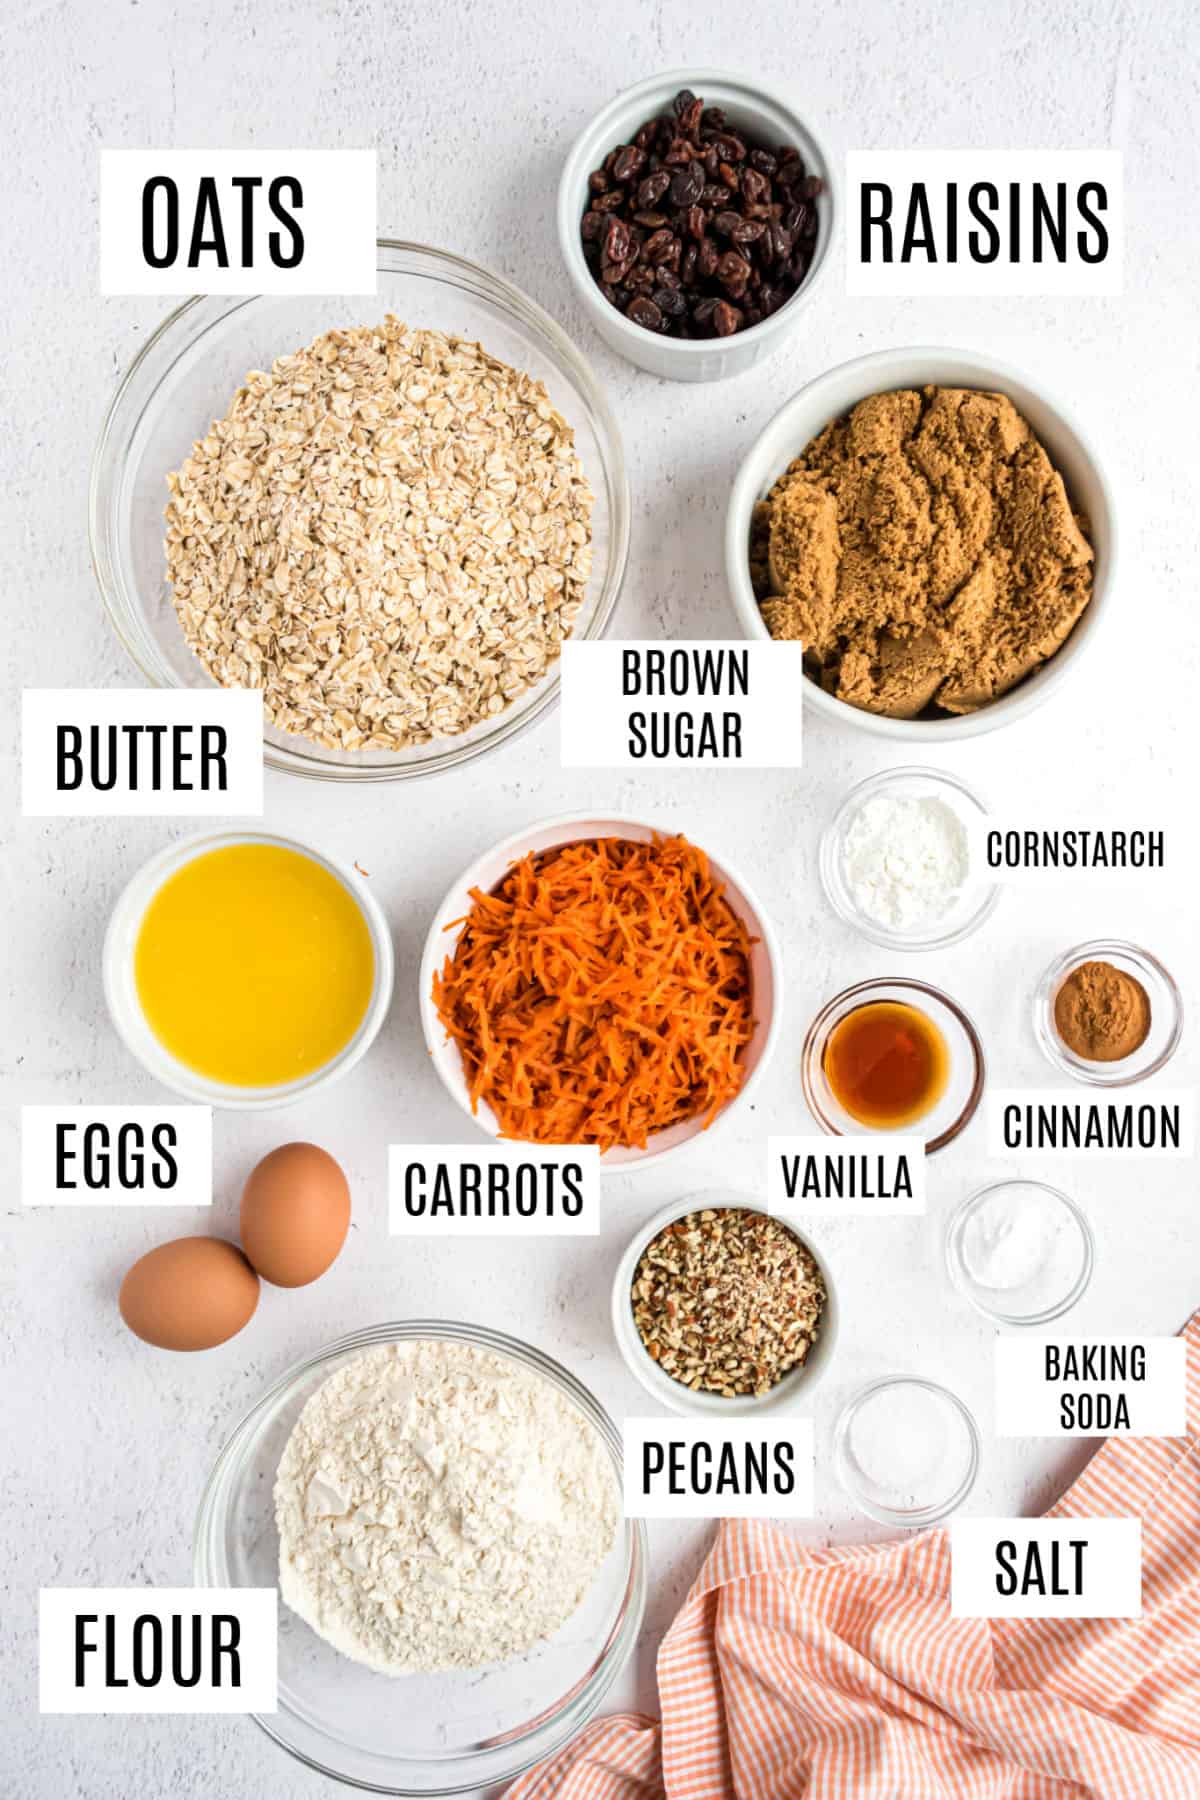 Carrot cake cookie ingredients on white table.